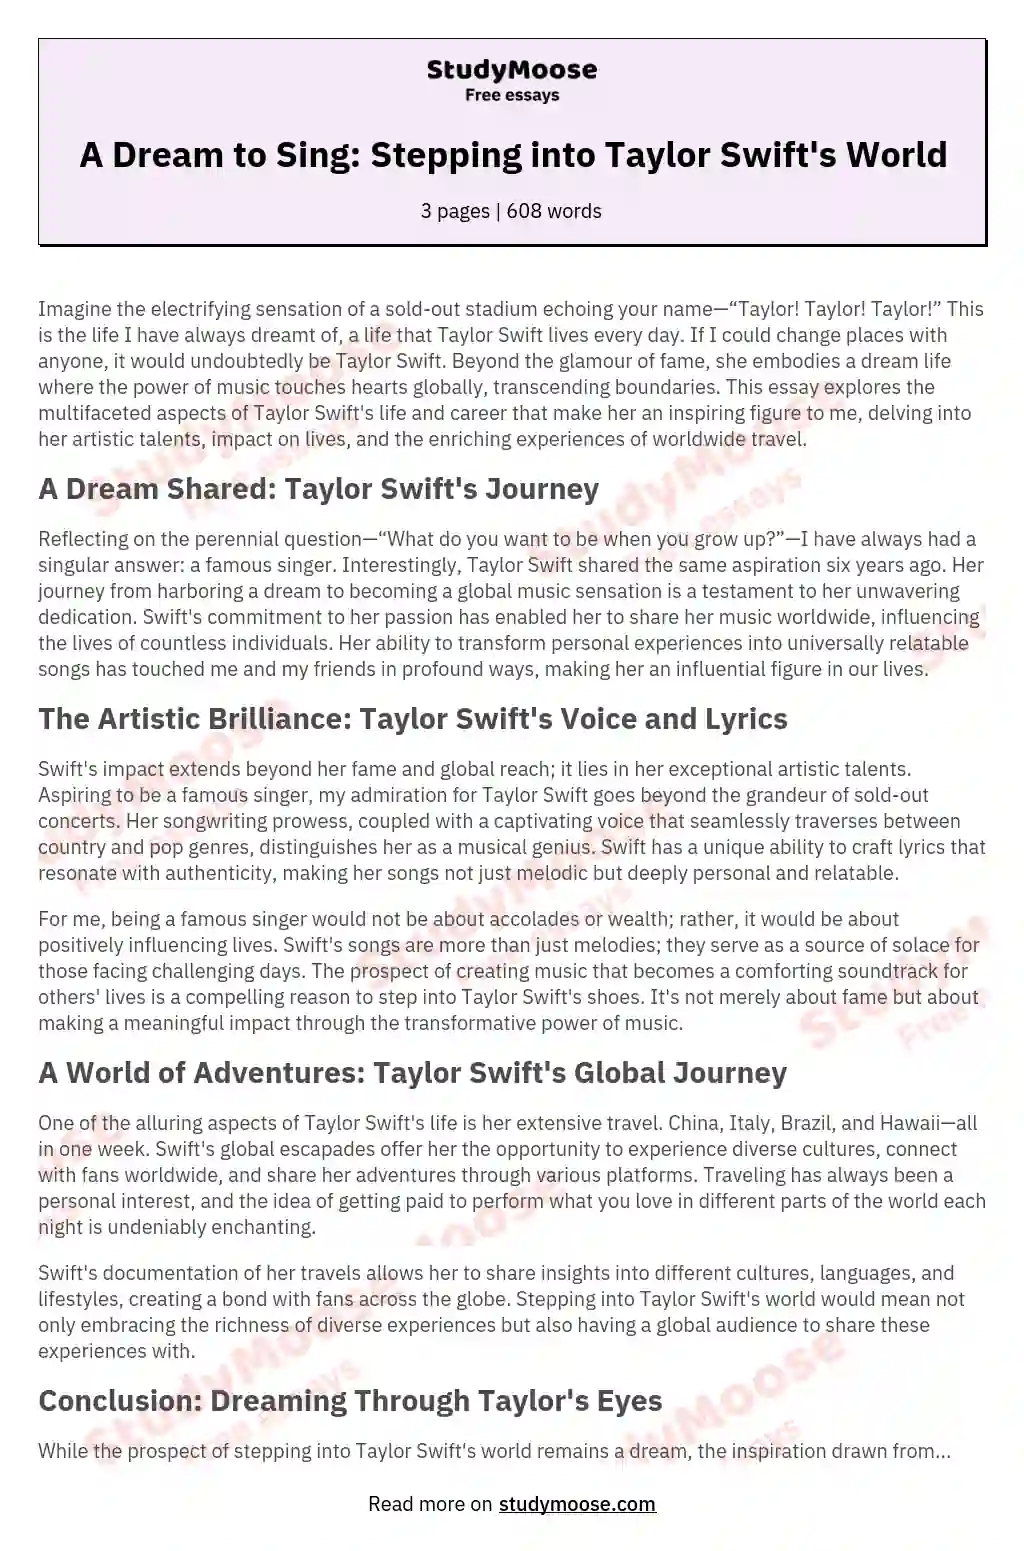 extended essay about taylor swift